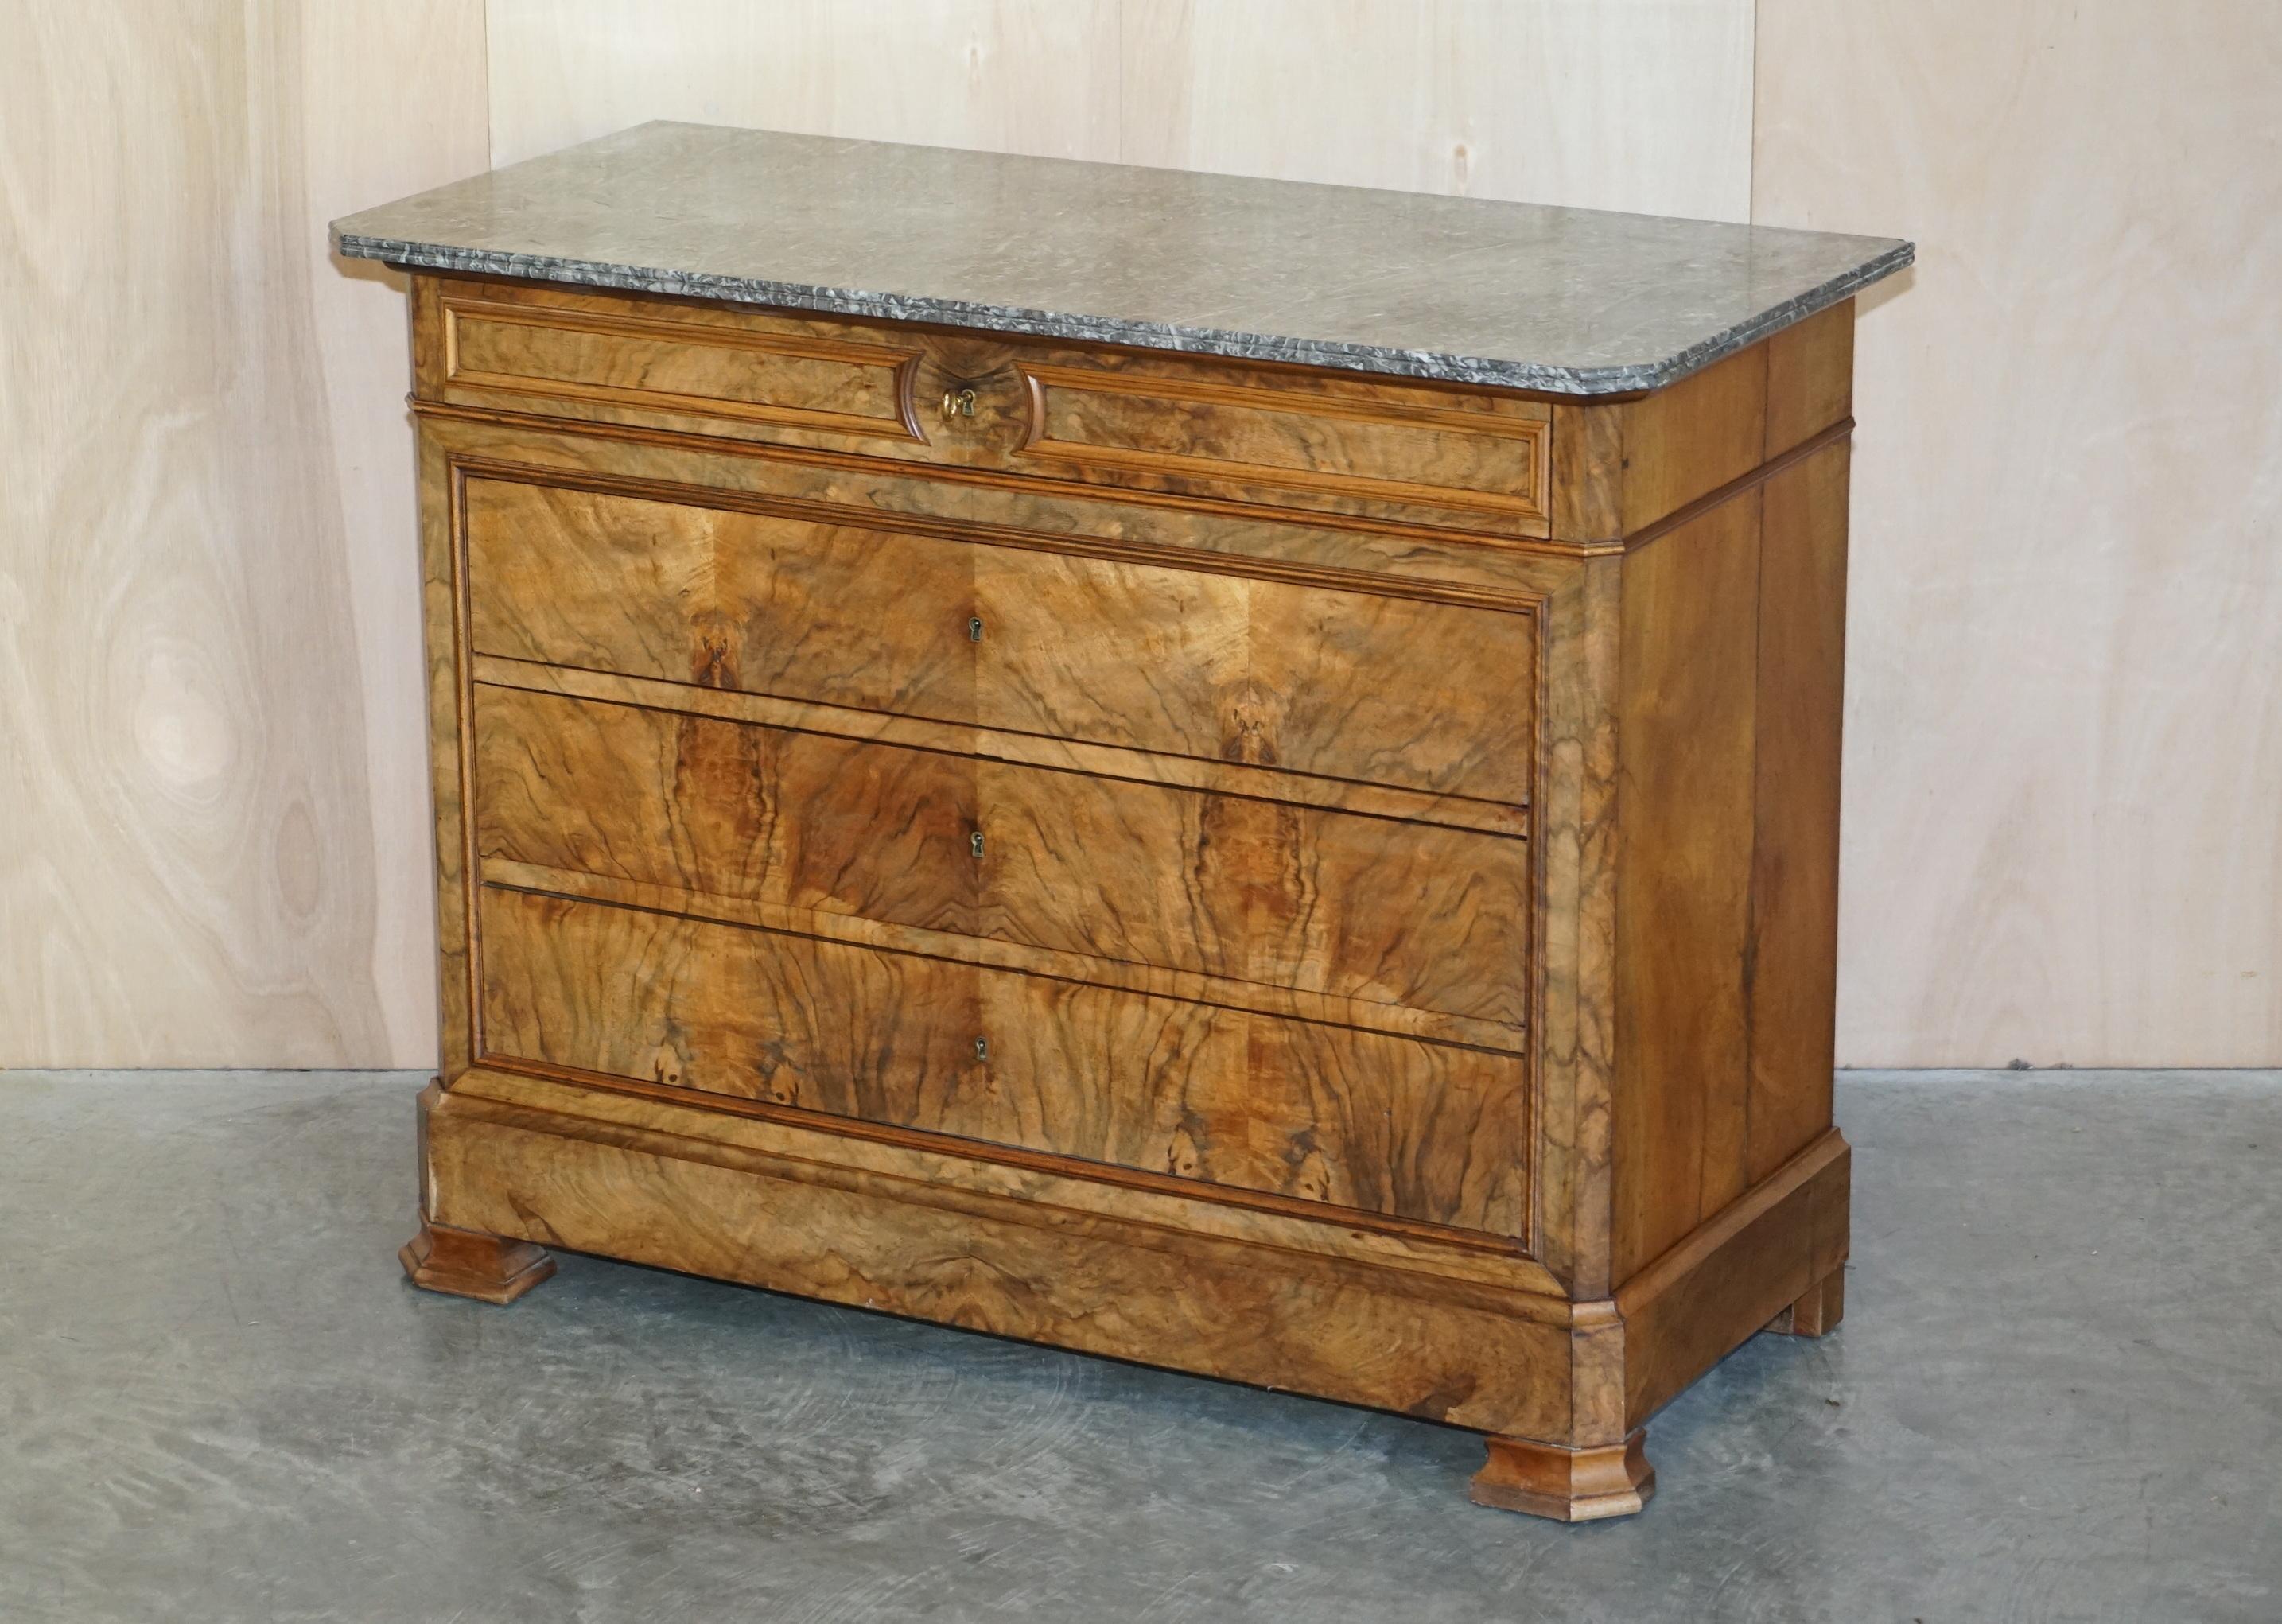 We are delighted to offer for sale this exquisite circa 1860 Continental Walnut & Marble chest of drawers with the original key

A very good looking and well made piece, this is Biedermeier furniture at its best, the colour and grain of the timber